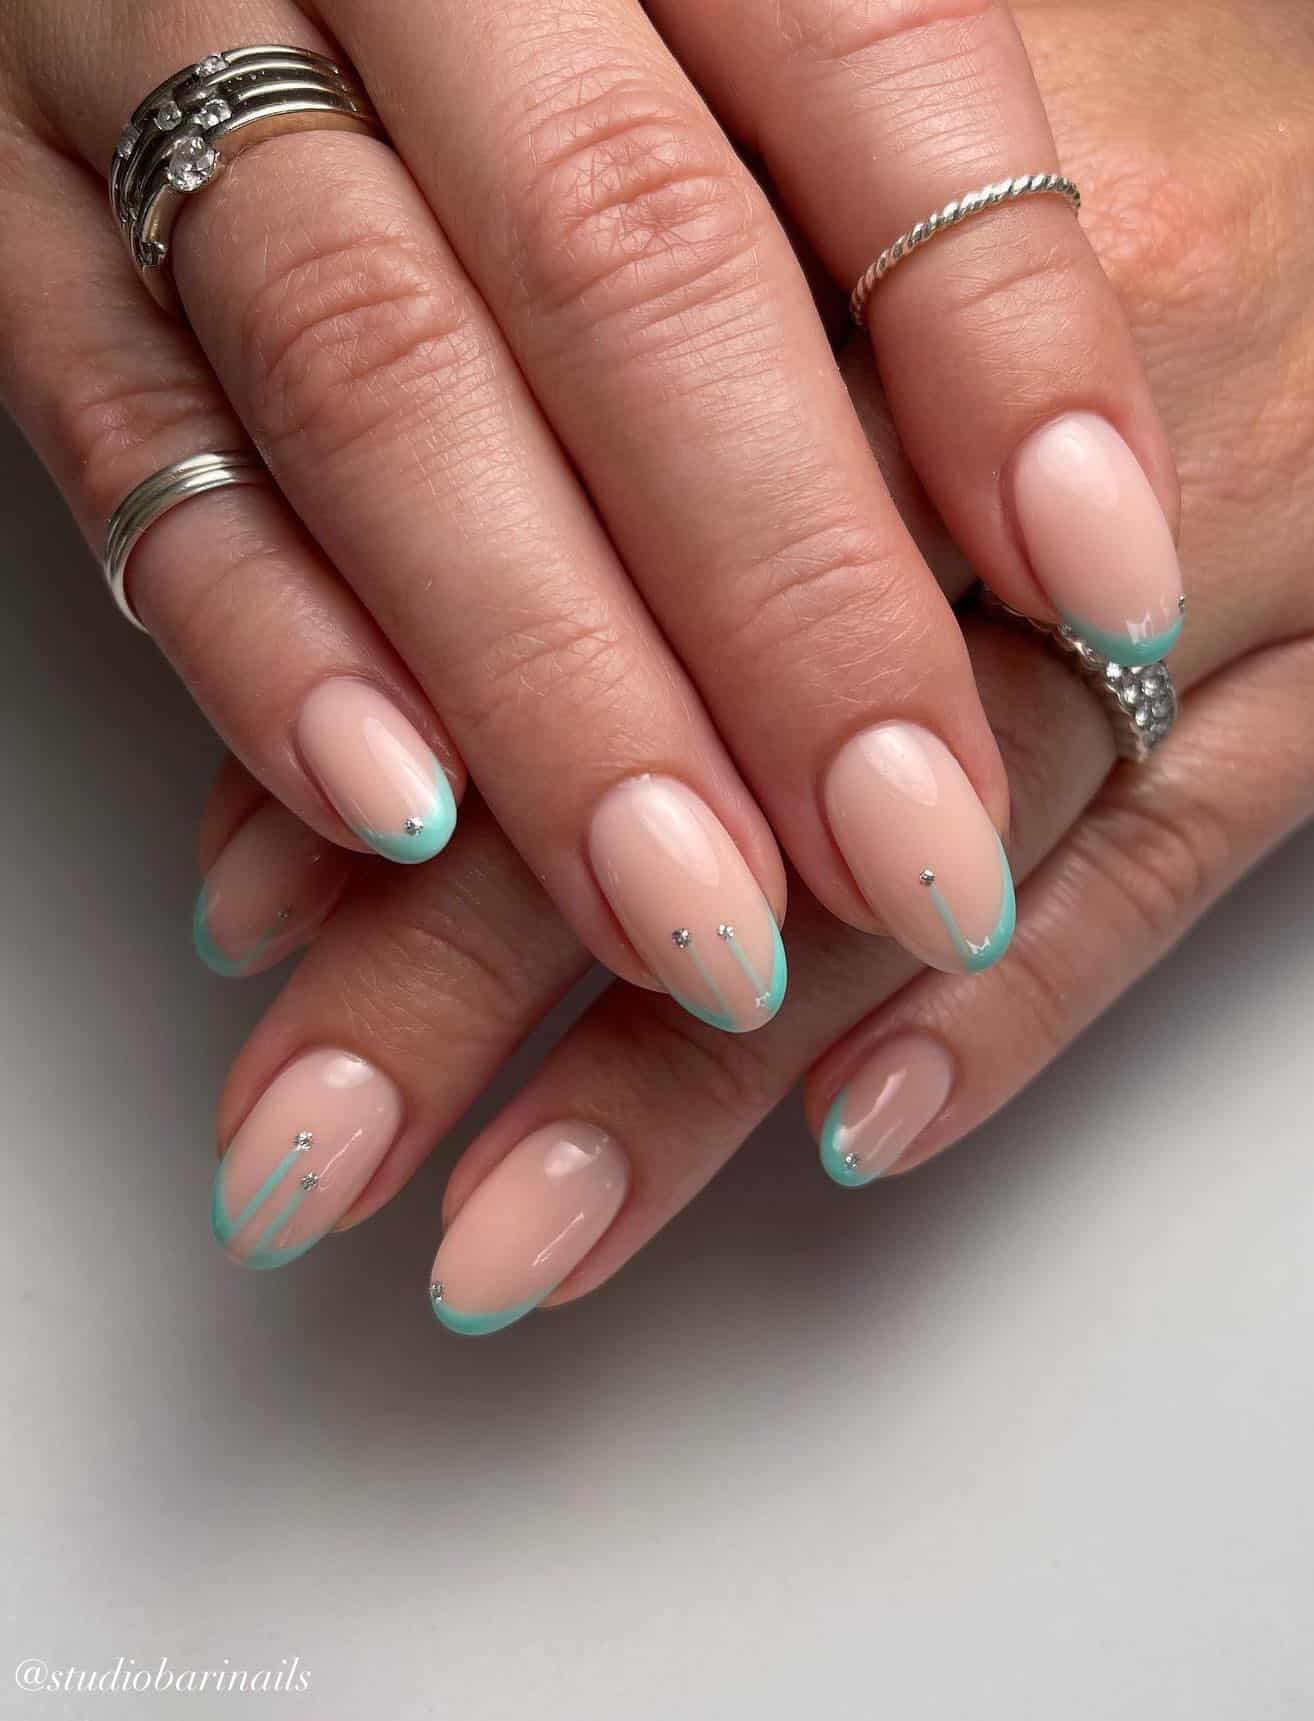 A hand with nude almond nails with mint green French tips painted with a dripping effect and silver gem accents